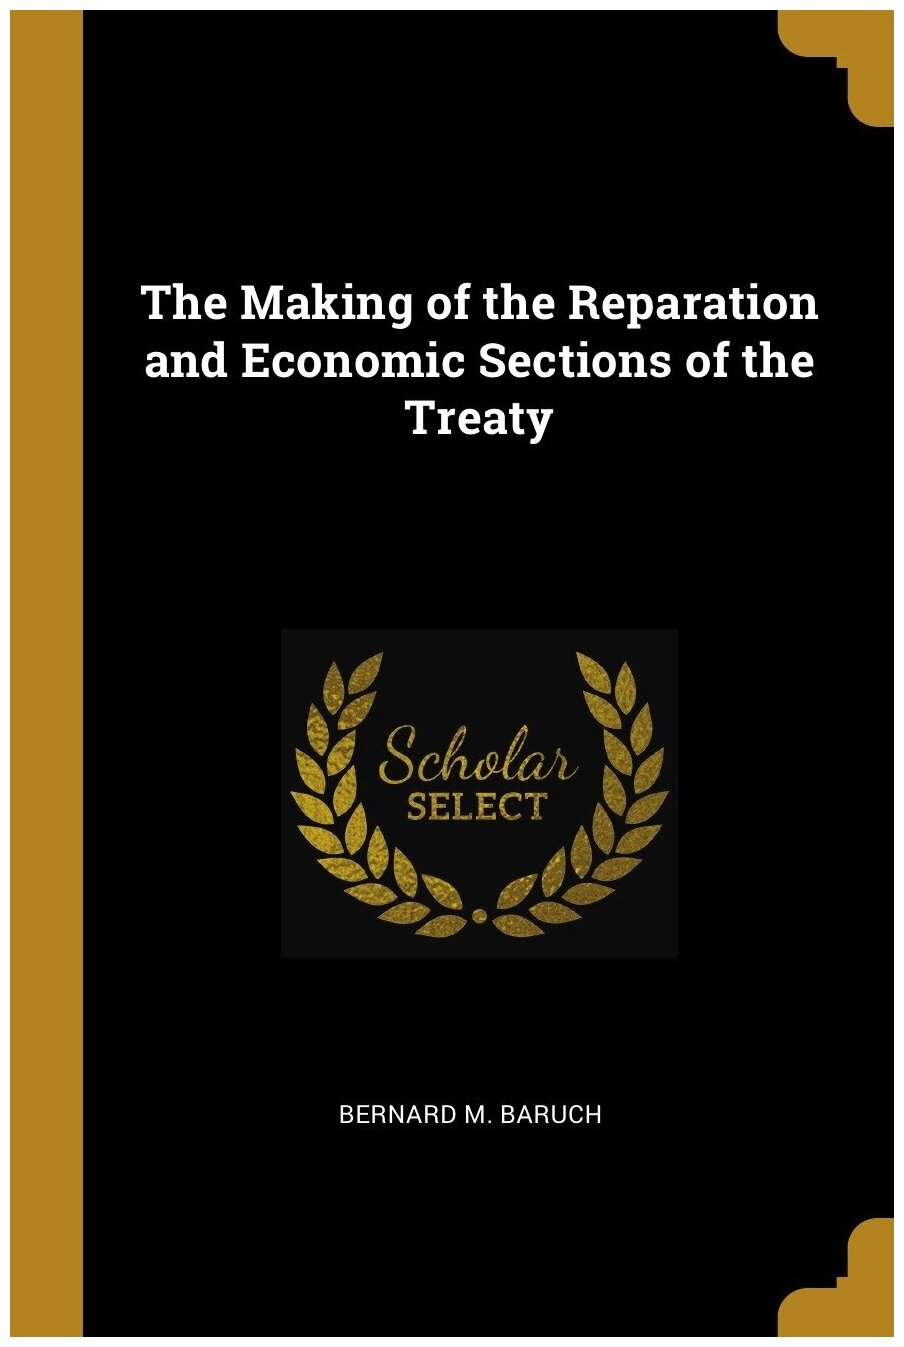 The Making of the Reparation and Economic Sections of the Treaty